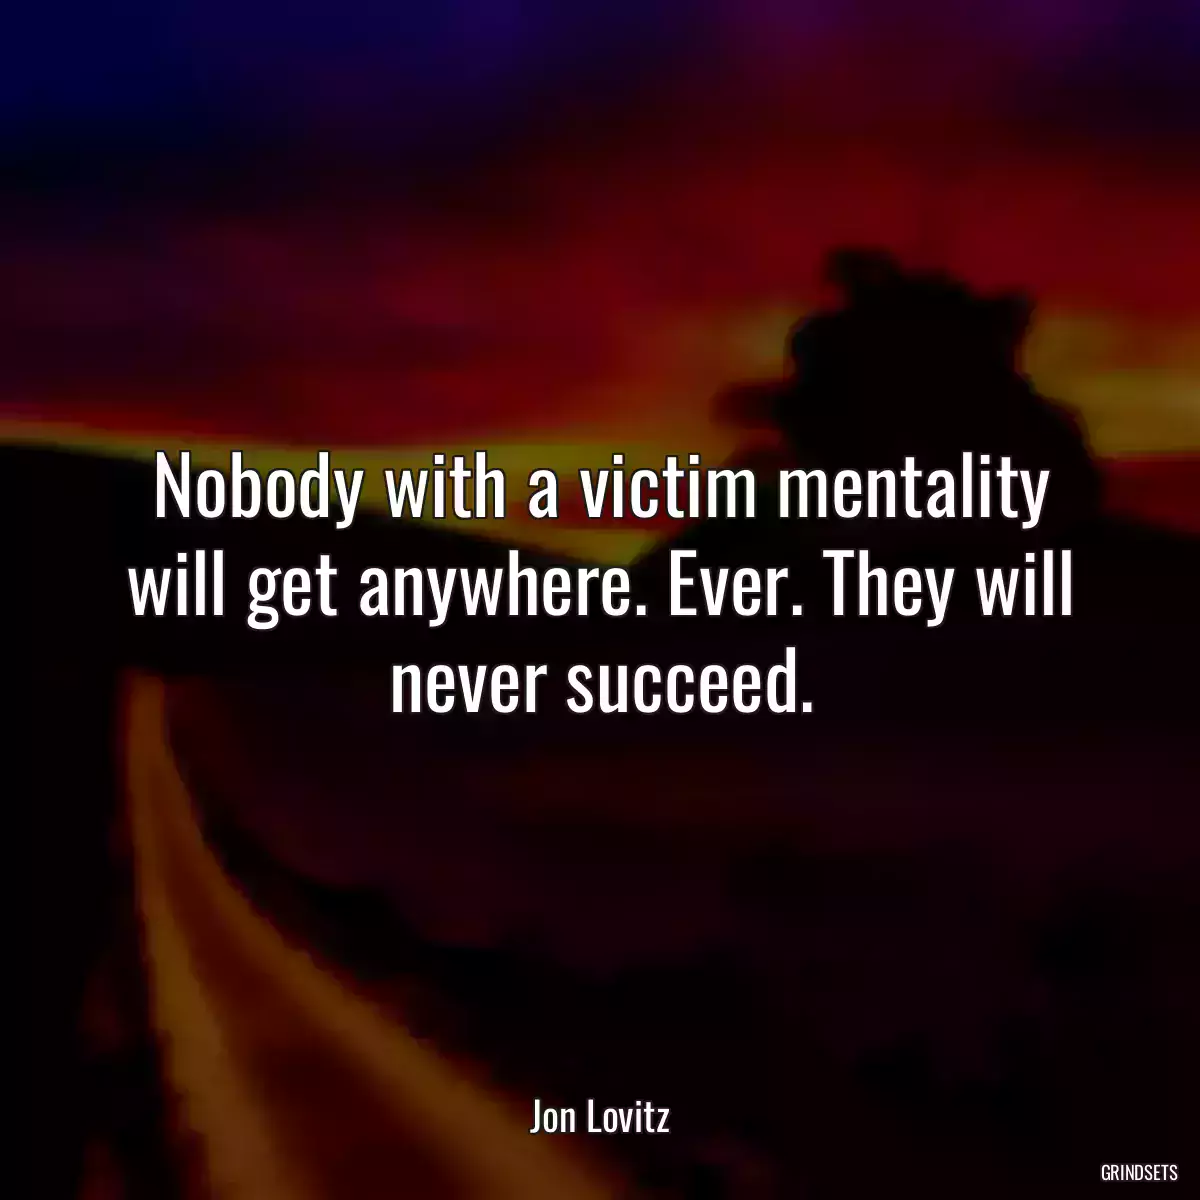 Nobody with a victim mentality will get anywhere. Ever. They will never succeed.